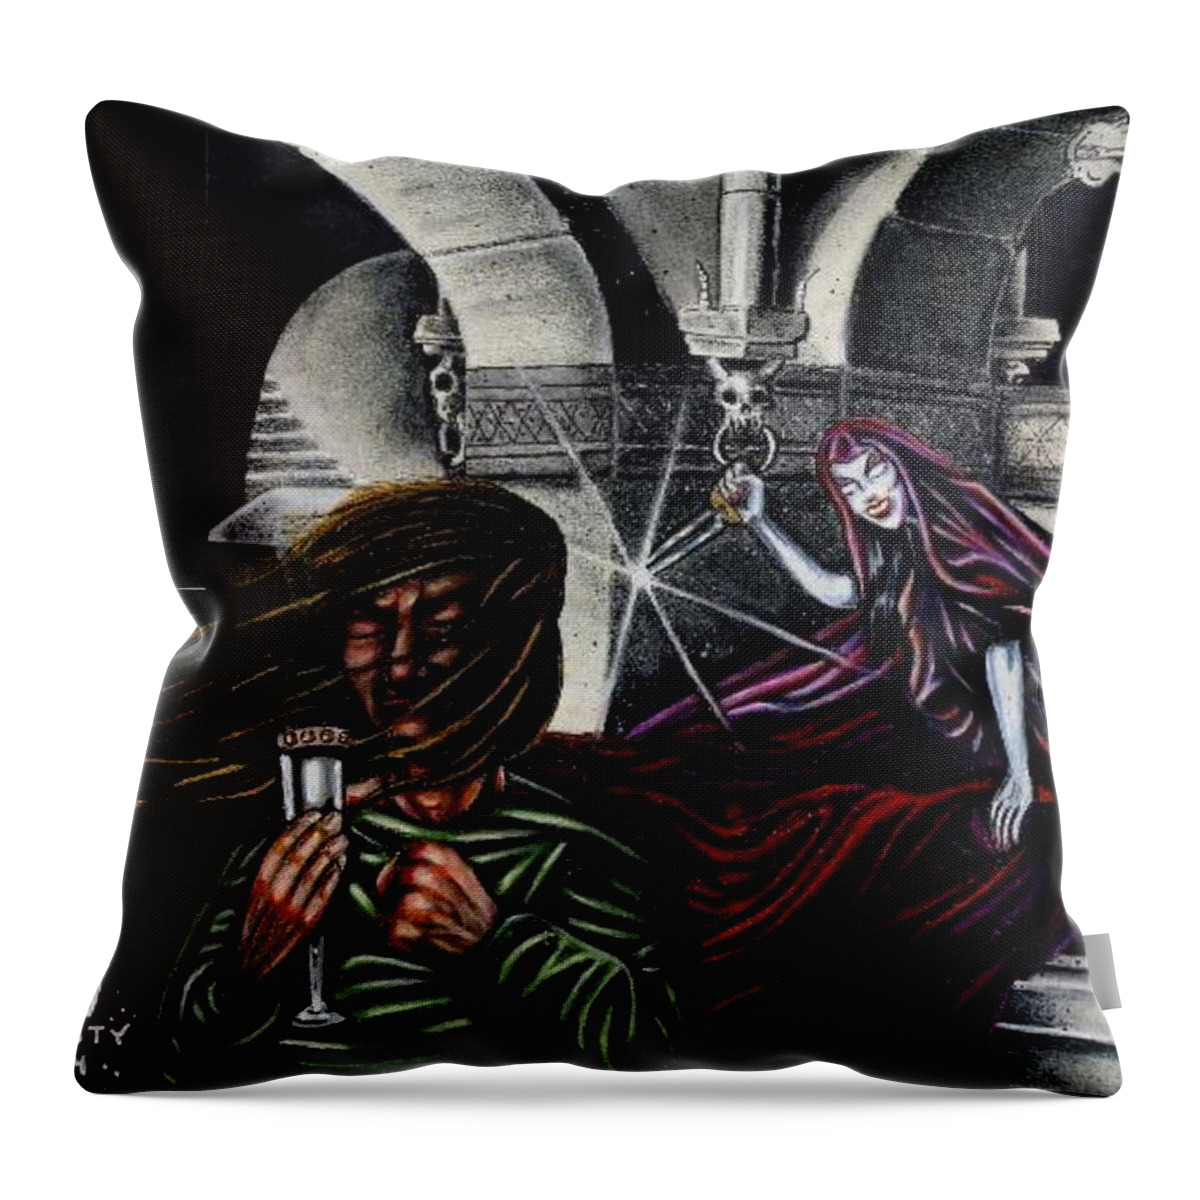 Desecrator Throw Pillow featuring the painting Desecrator album cover by Ryan Almighty